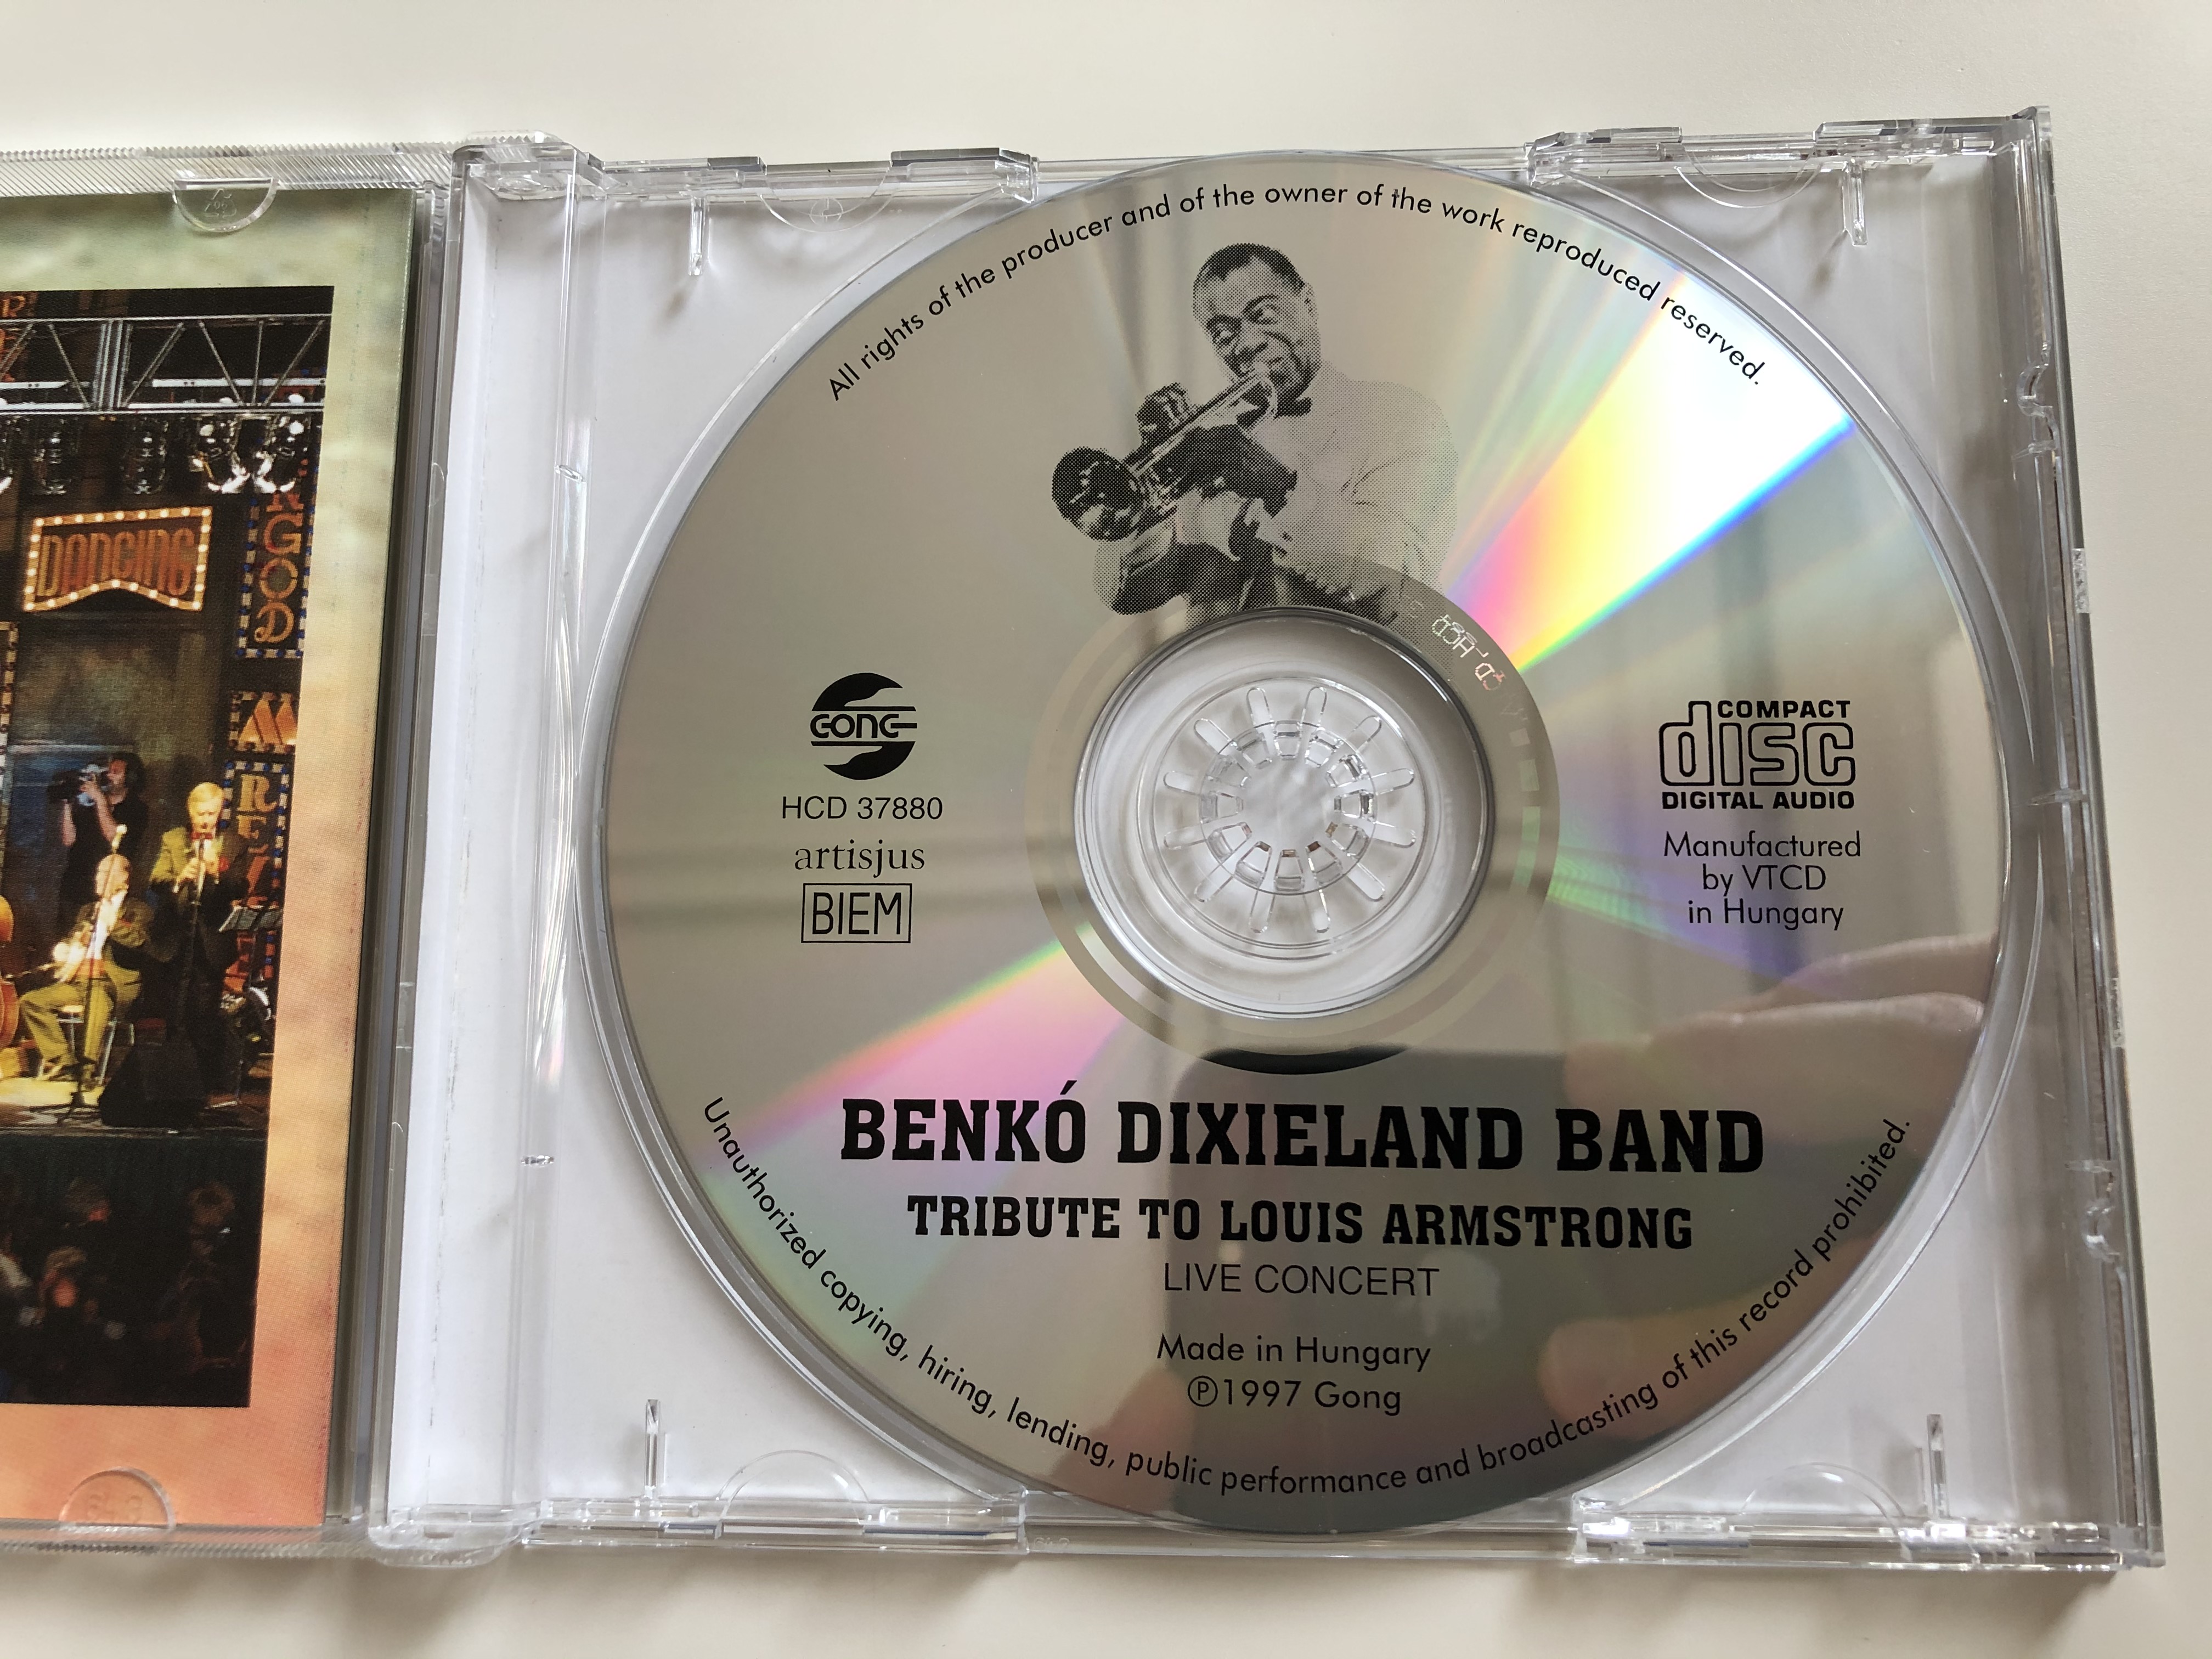 benko-dixieland-band-tribute-to-louis-armstrong-live-concert-gong-audio-cd-1997-hcd-37880-7-.jpg